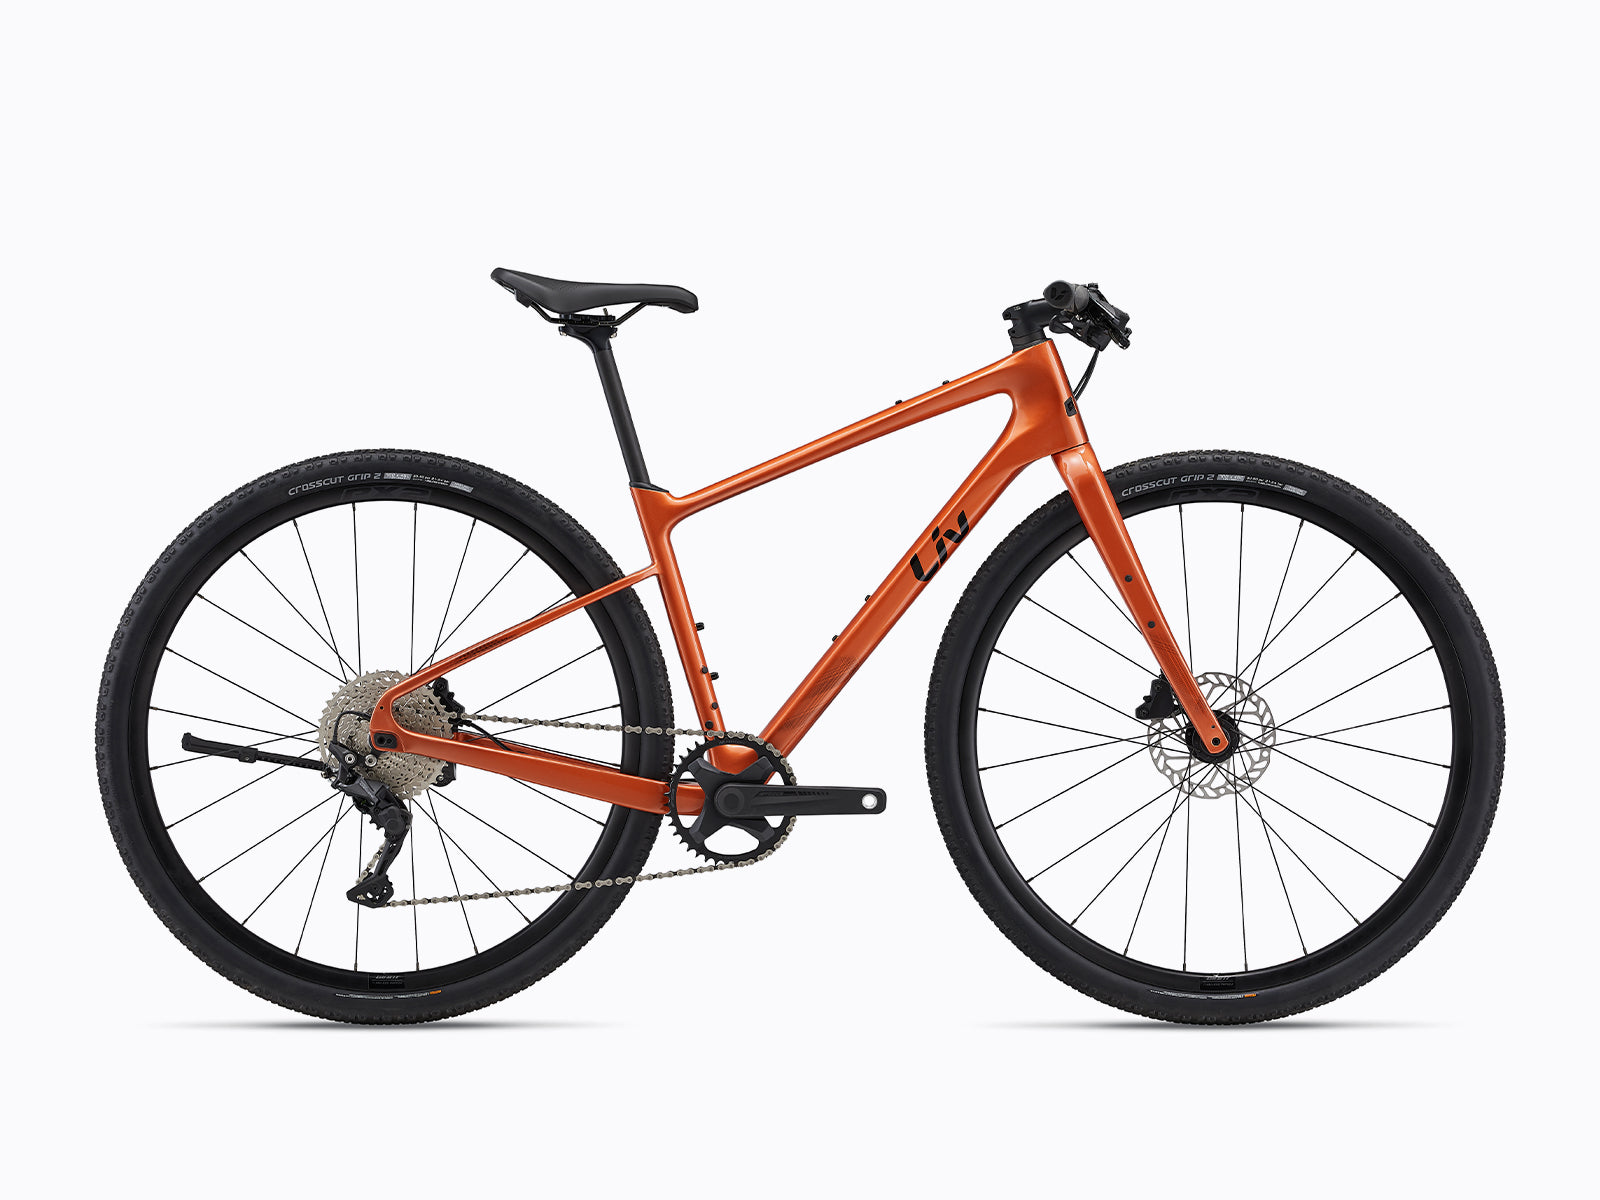 Image features a Liv thrive advanced gx in copper colour, sold by Giant Melbourne (a bike store in Melbourne, Australia) 